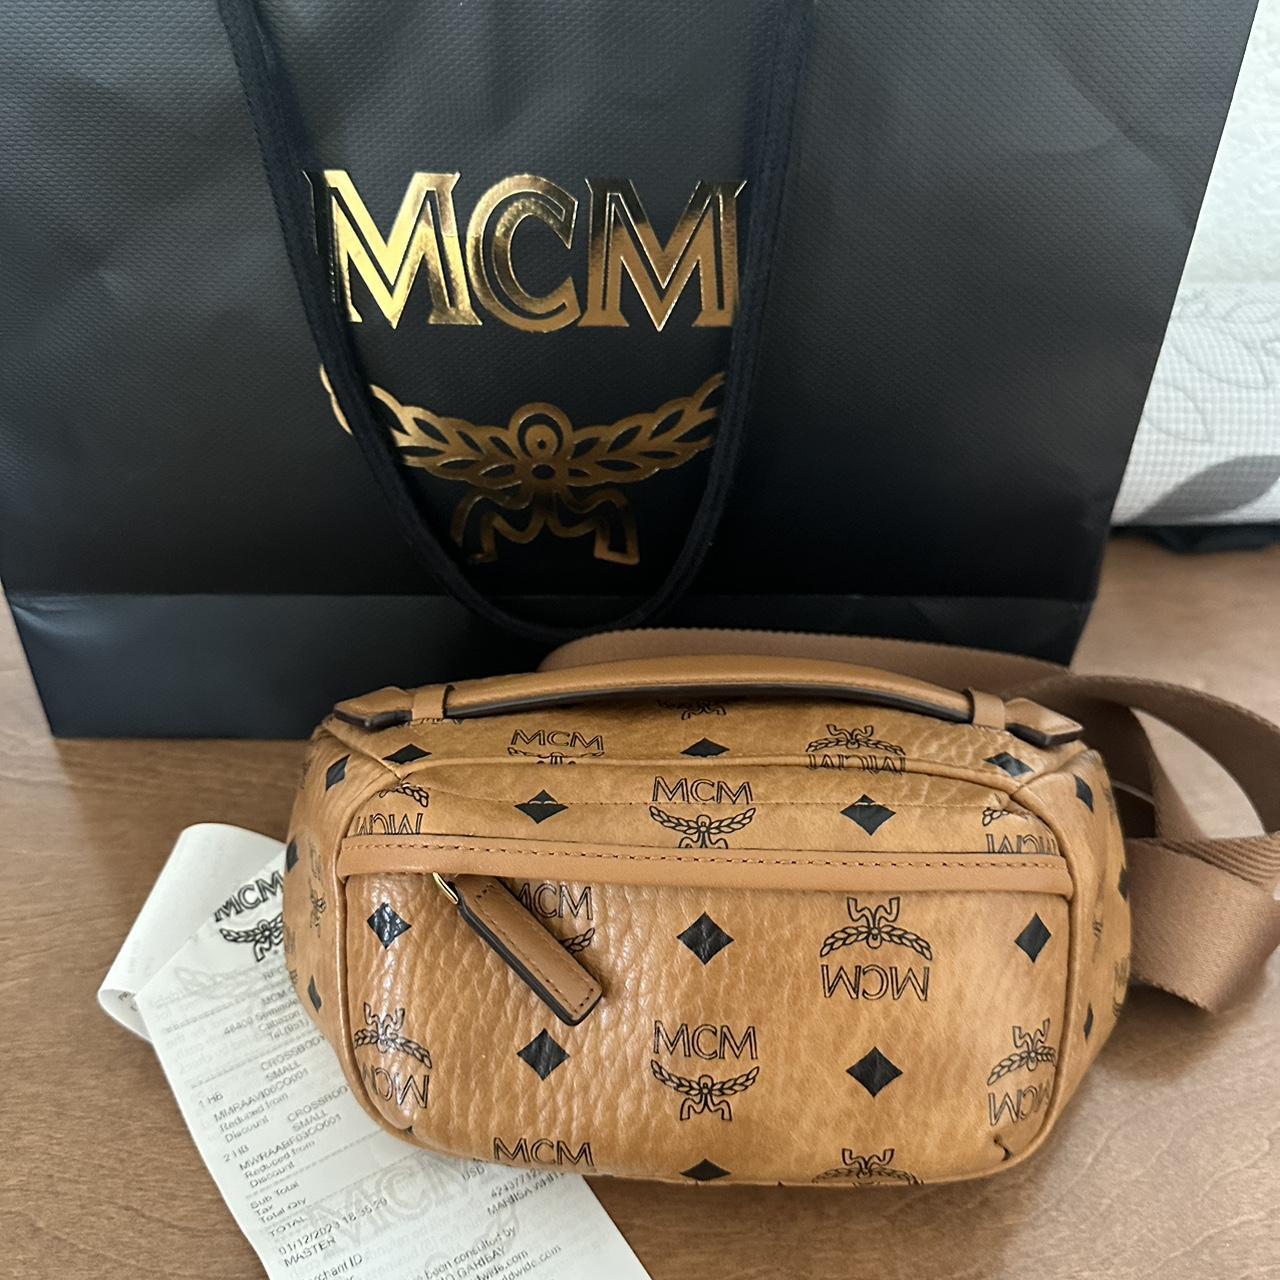 MCM Name Tag Crossbody Bags for Women